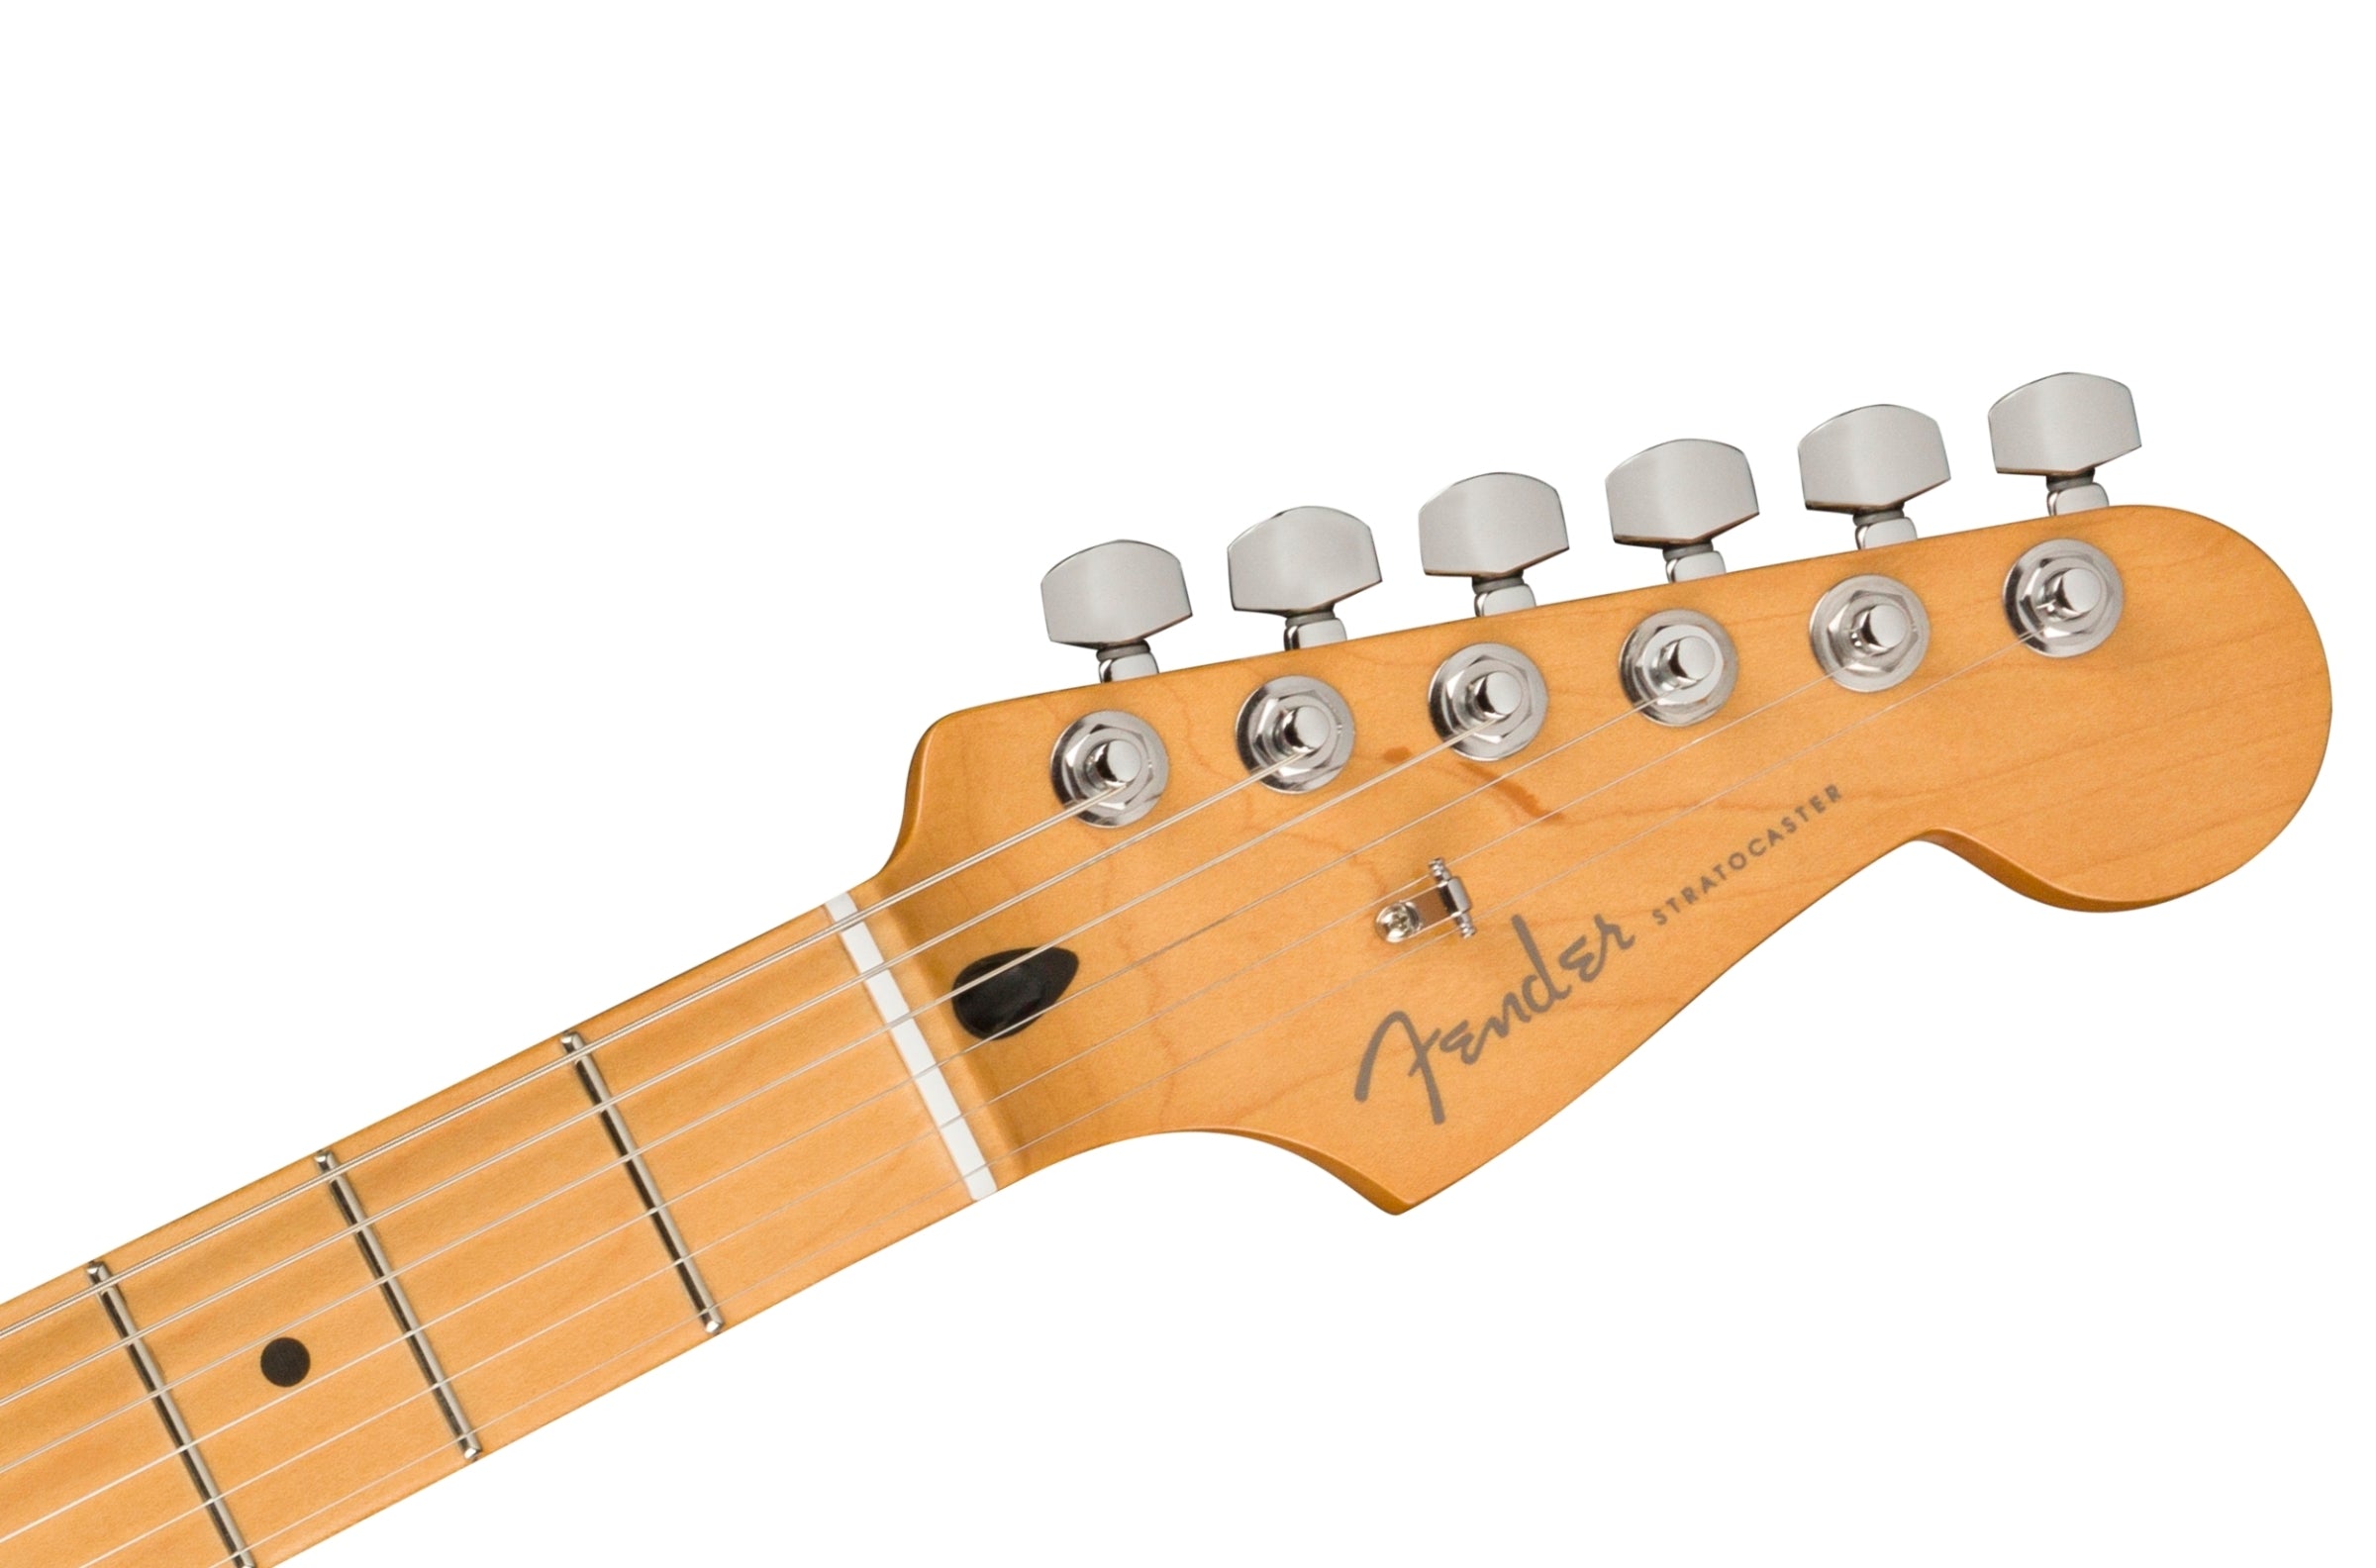 Fender Player Plus Stratocaster Electric Guitar - Tequila Sunrise